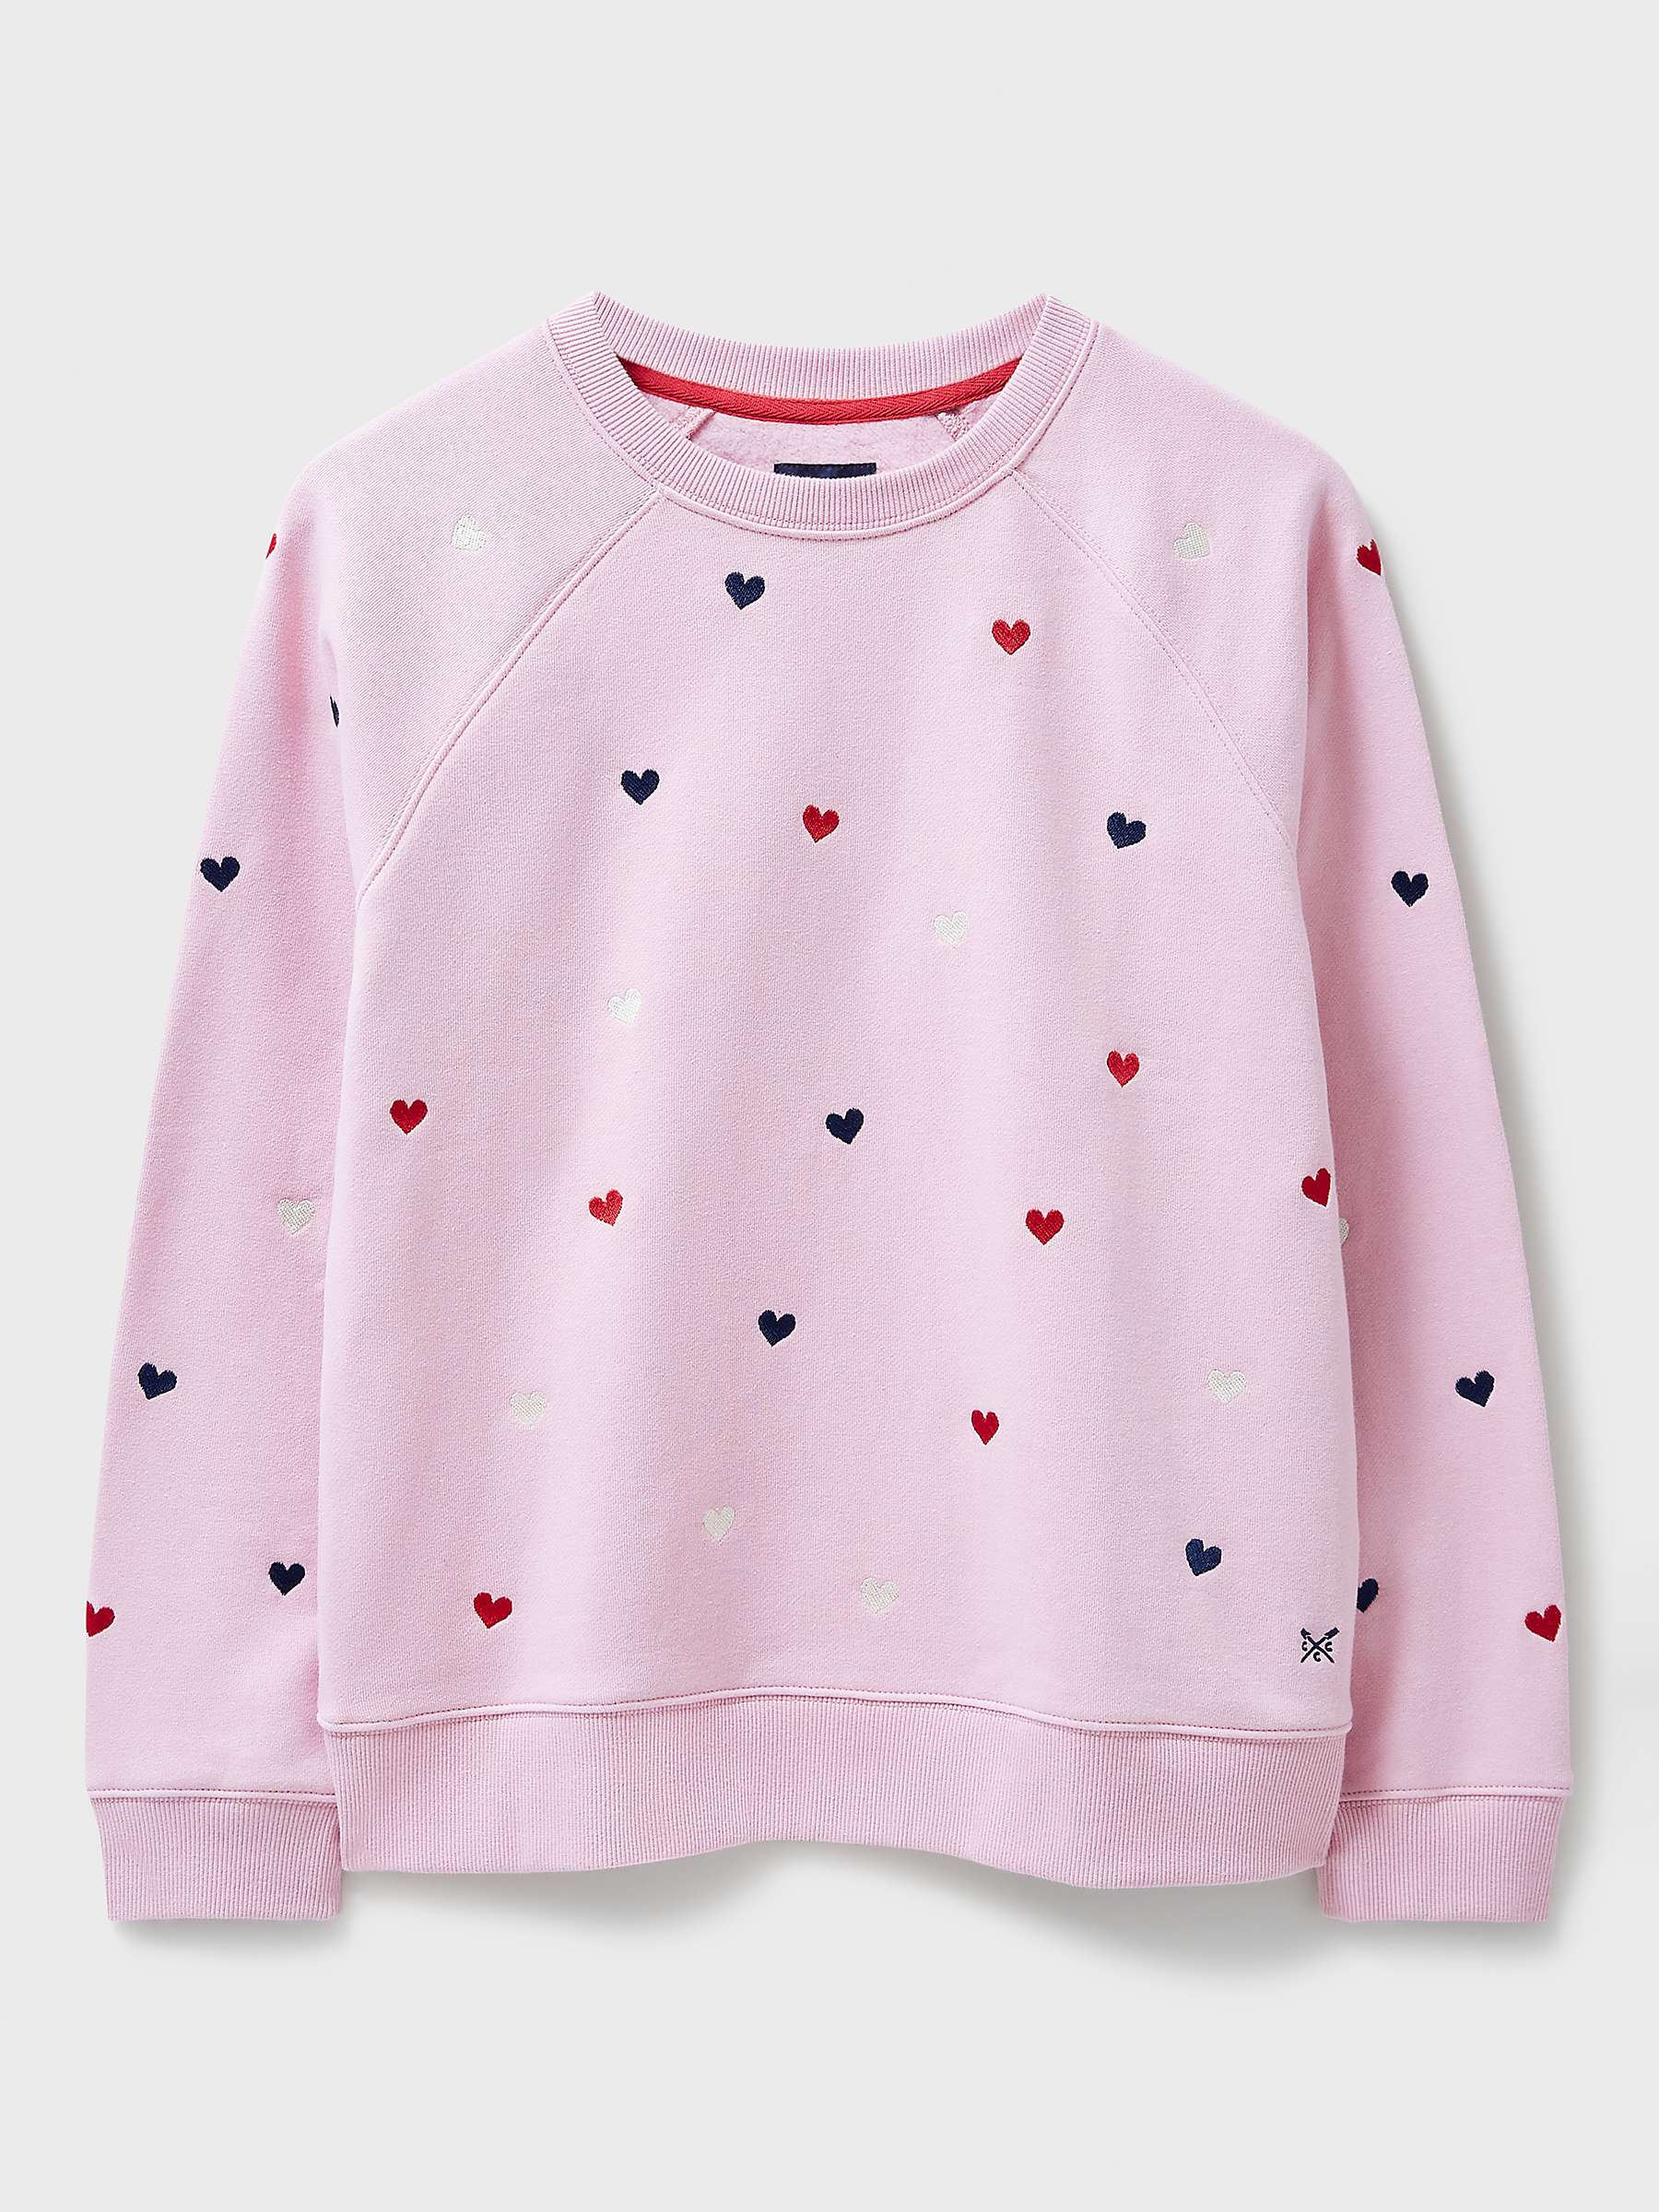 Buy Crew Clothing Heart Embroidered Sweatshirt, Bright Pink/Multi Online at johnlewis.com